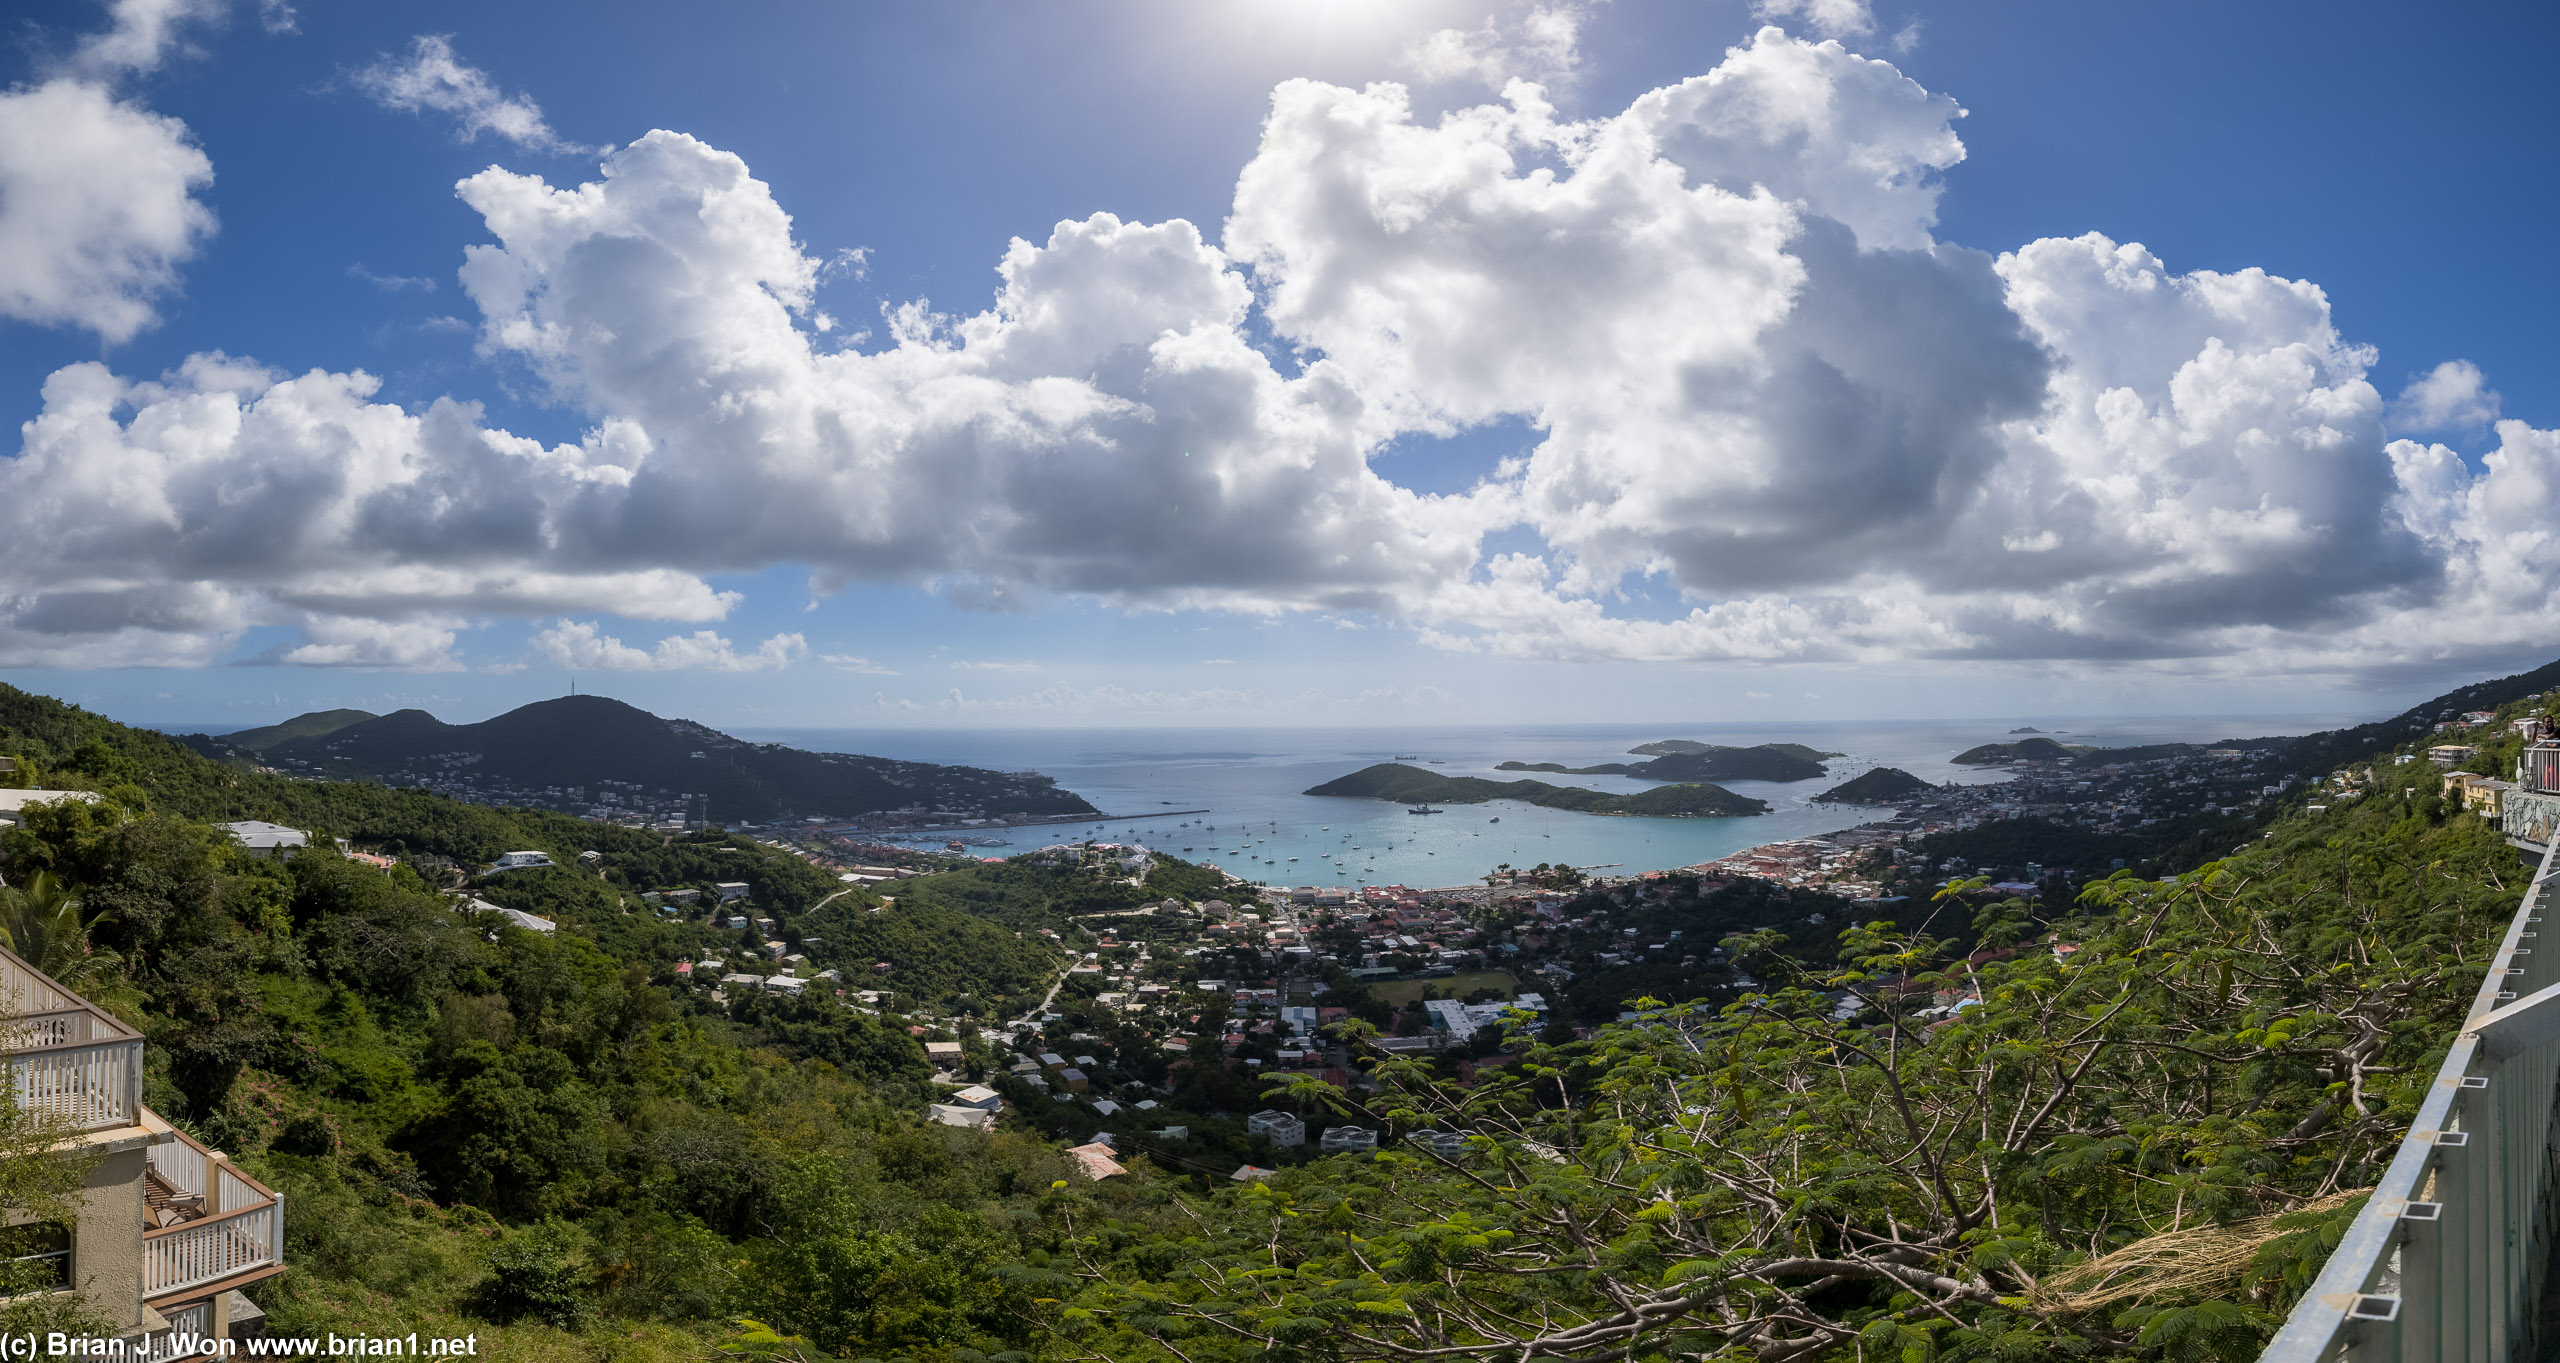 Charlotte Amalie Overlook. Normally the harbor would be full of cruise ships.